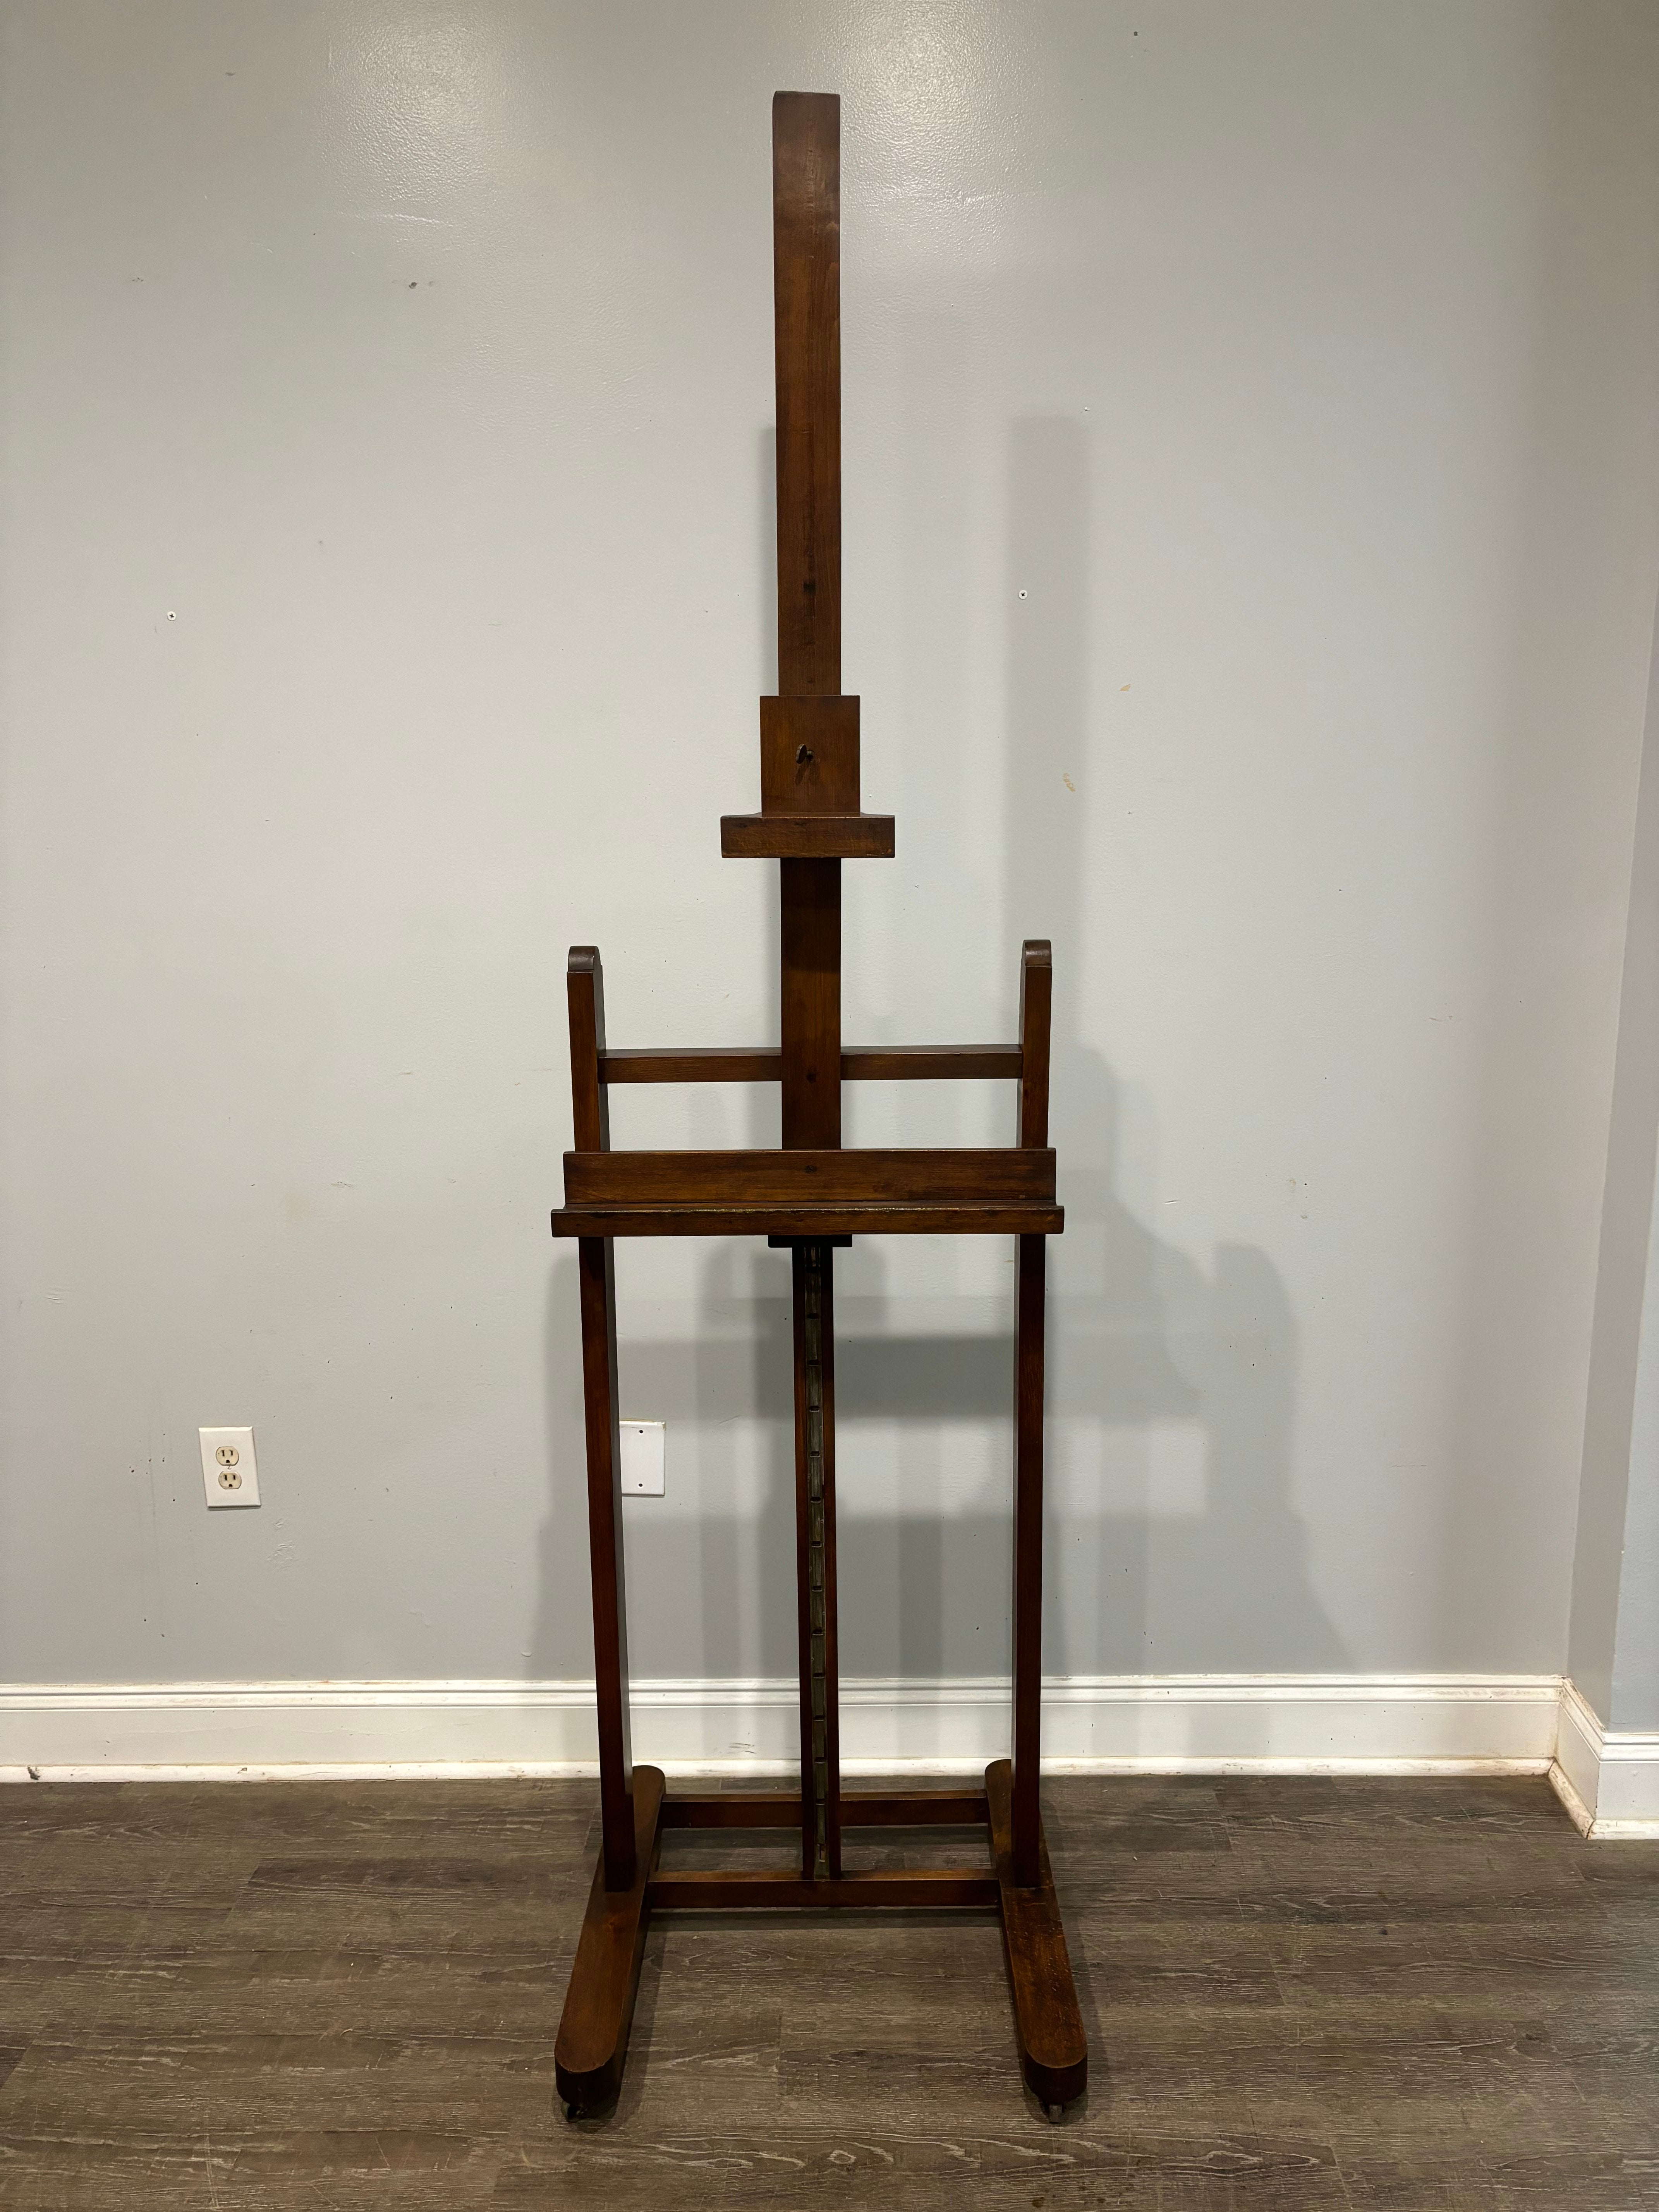 This 19th century Easel is made of oak and has 4 wheels at the feet which make it easier to move it.
when the support for the painting is positioned at its lowest, the height is 51''H.
When the support is at its highest, the height is 85''H.
